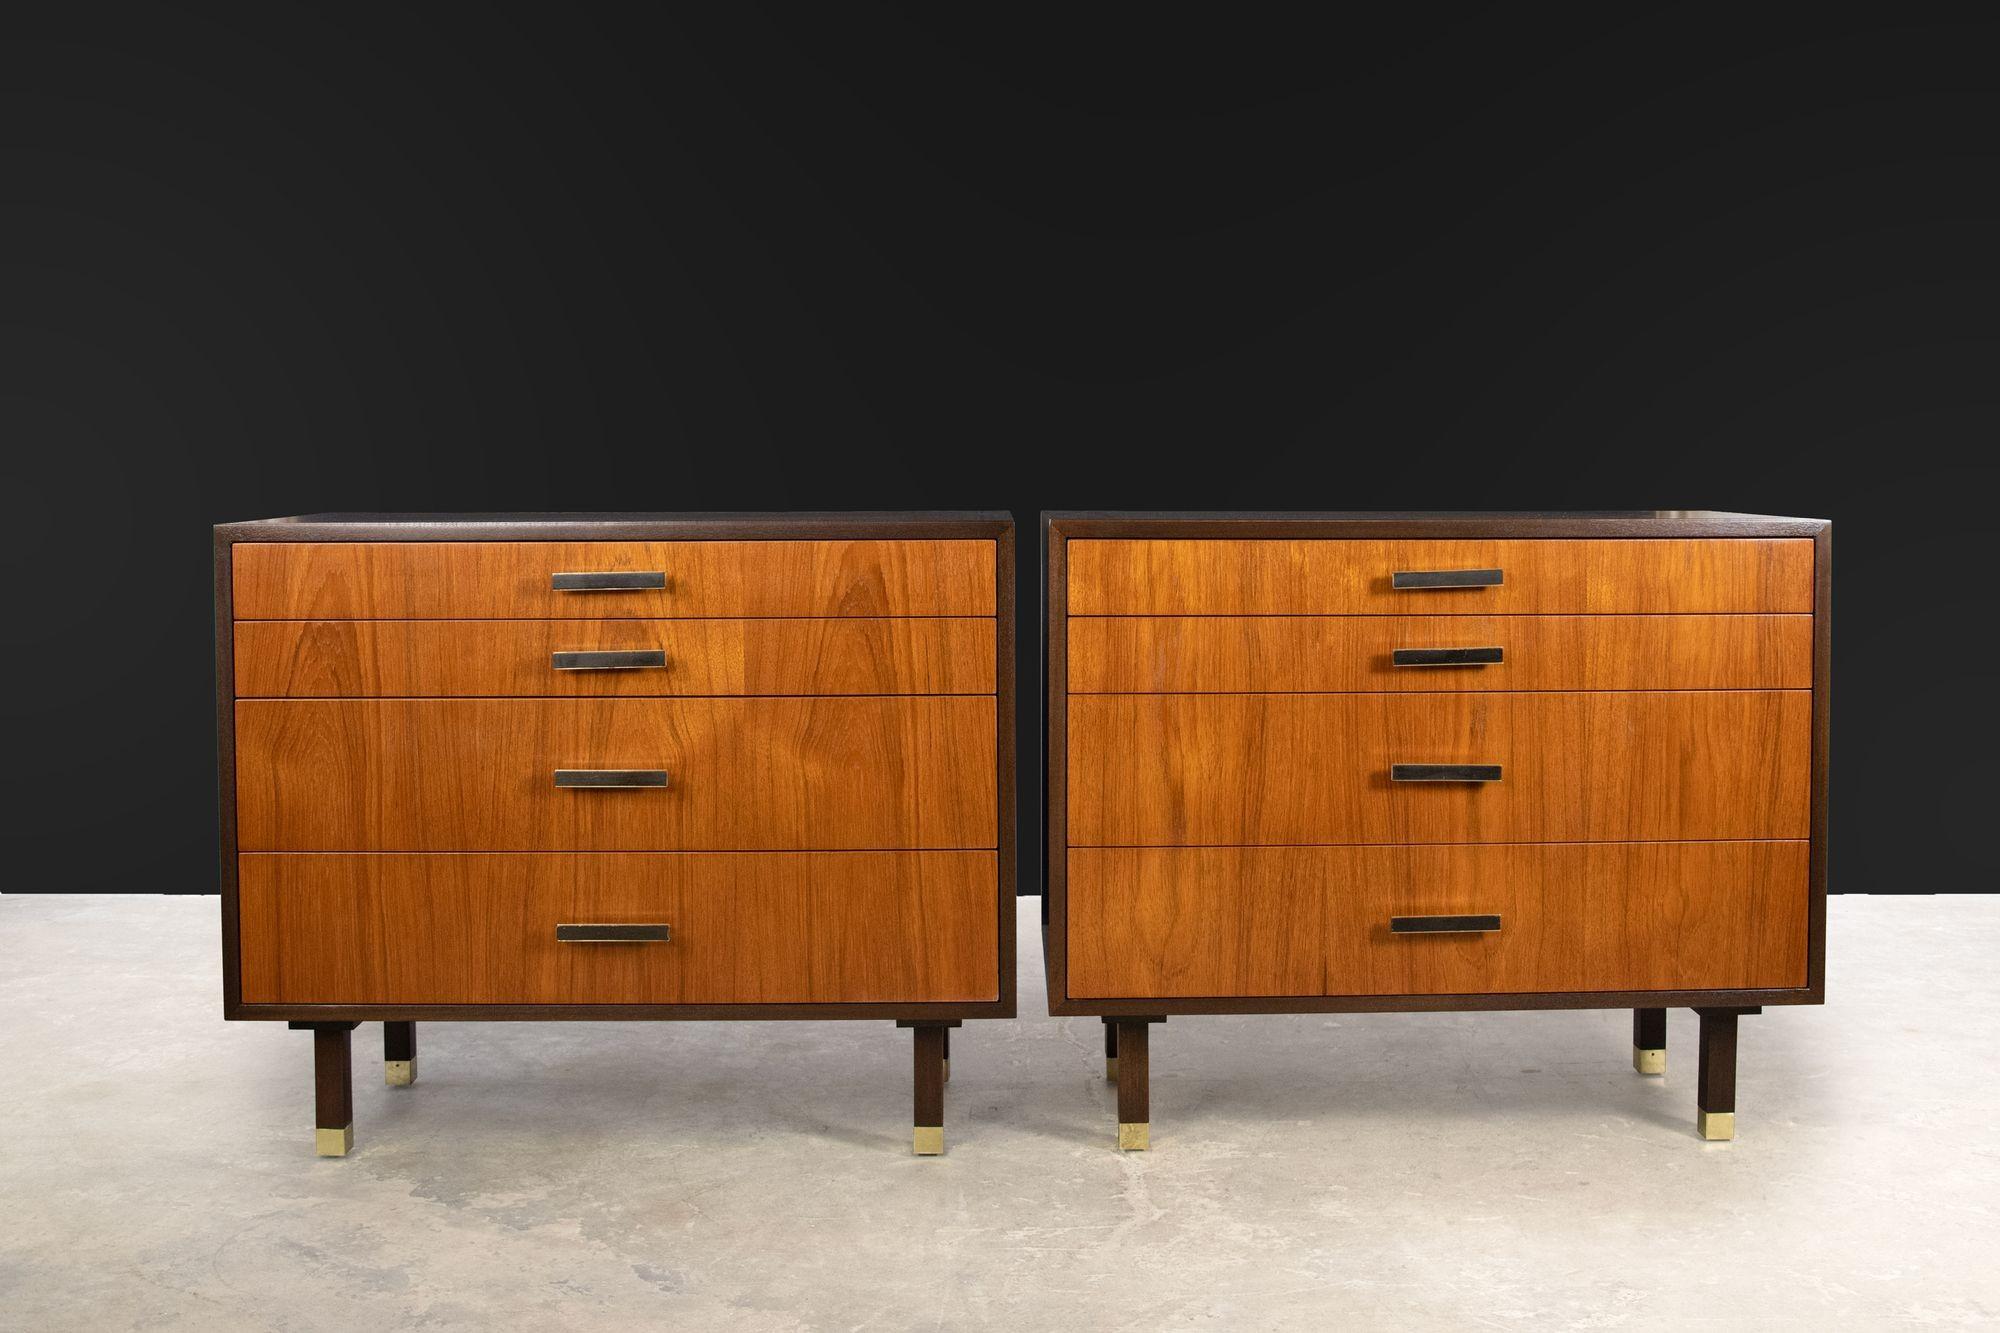 Beautiful matched pair of four-drawer chests by Harvey Probber. Constructed from mahogany, teak with brass & ebony inlaid pulls. Both chests have been professionally restored.